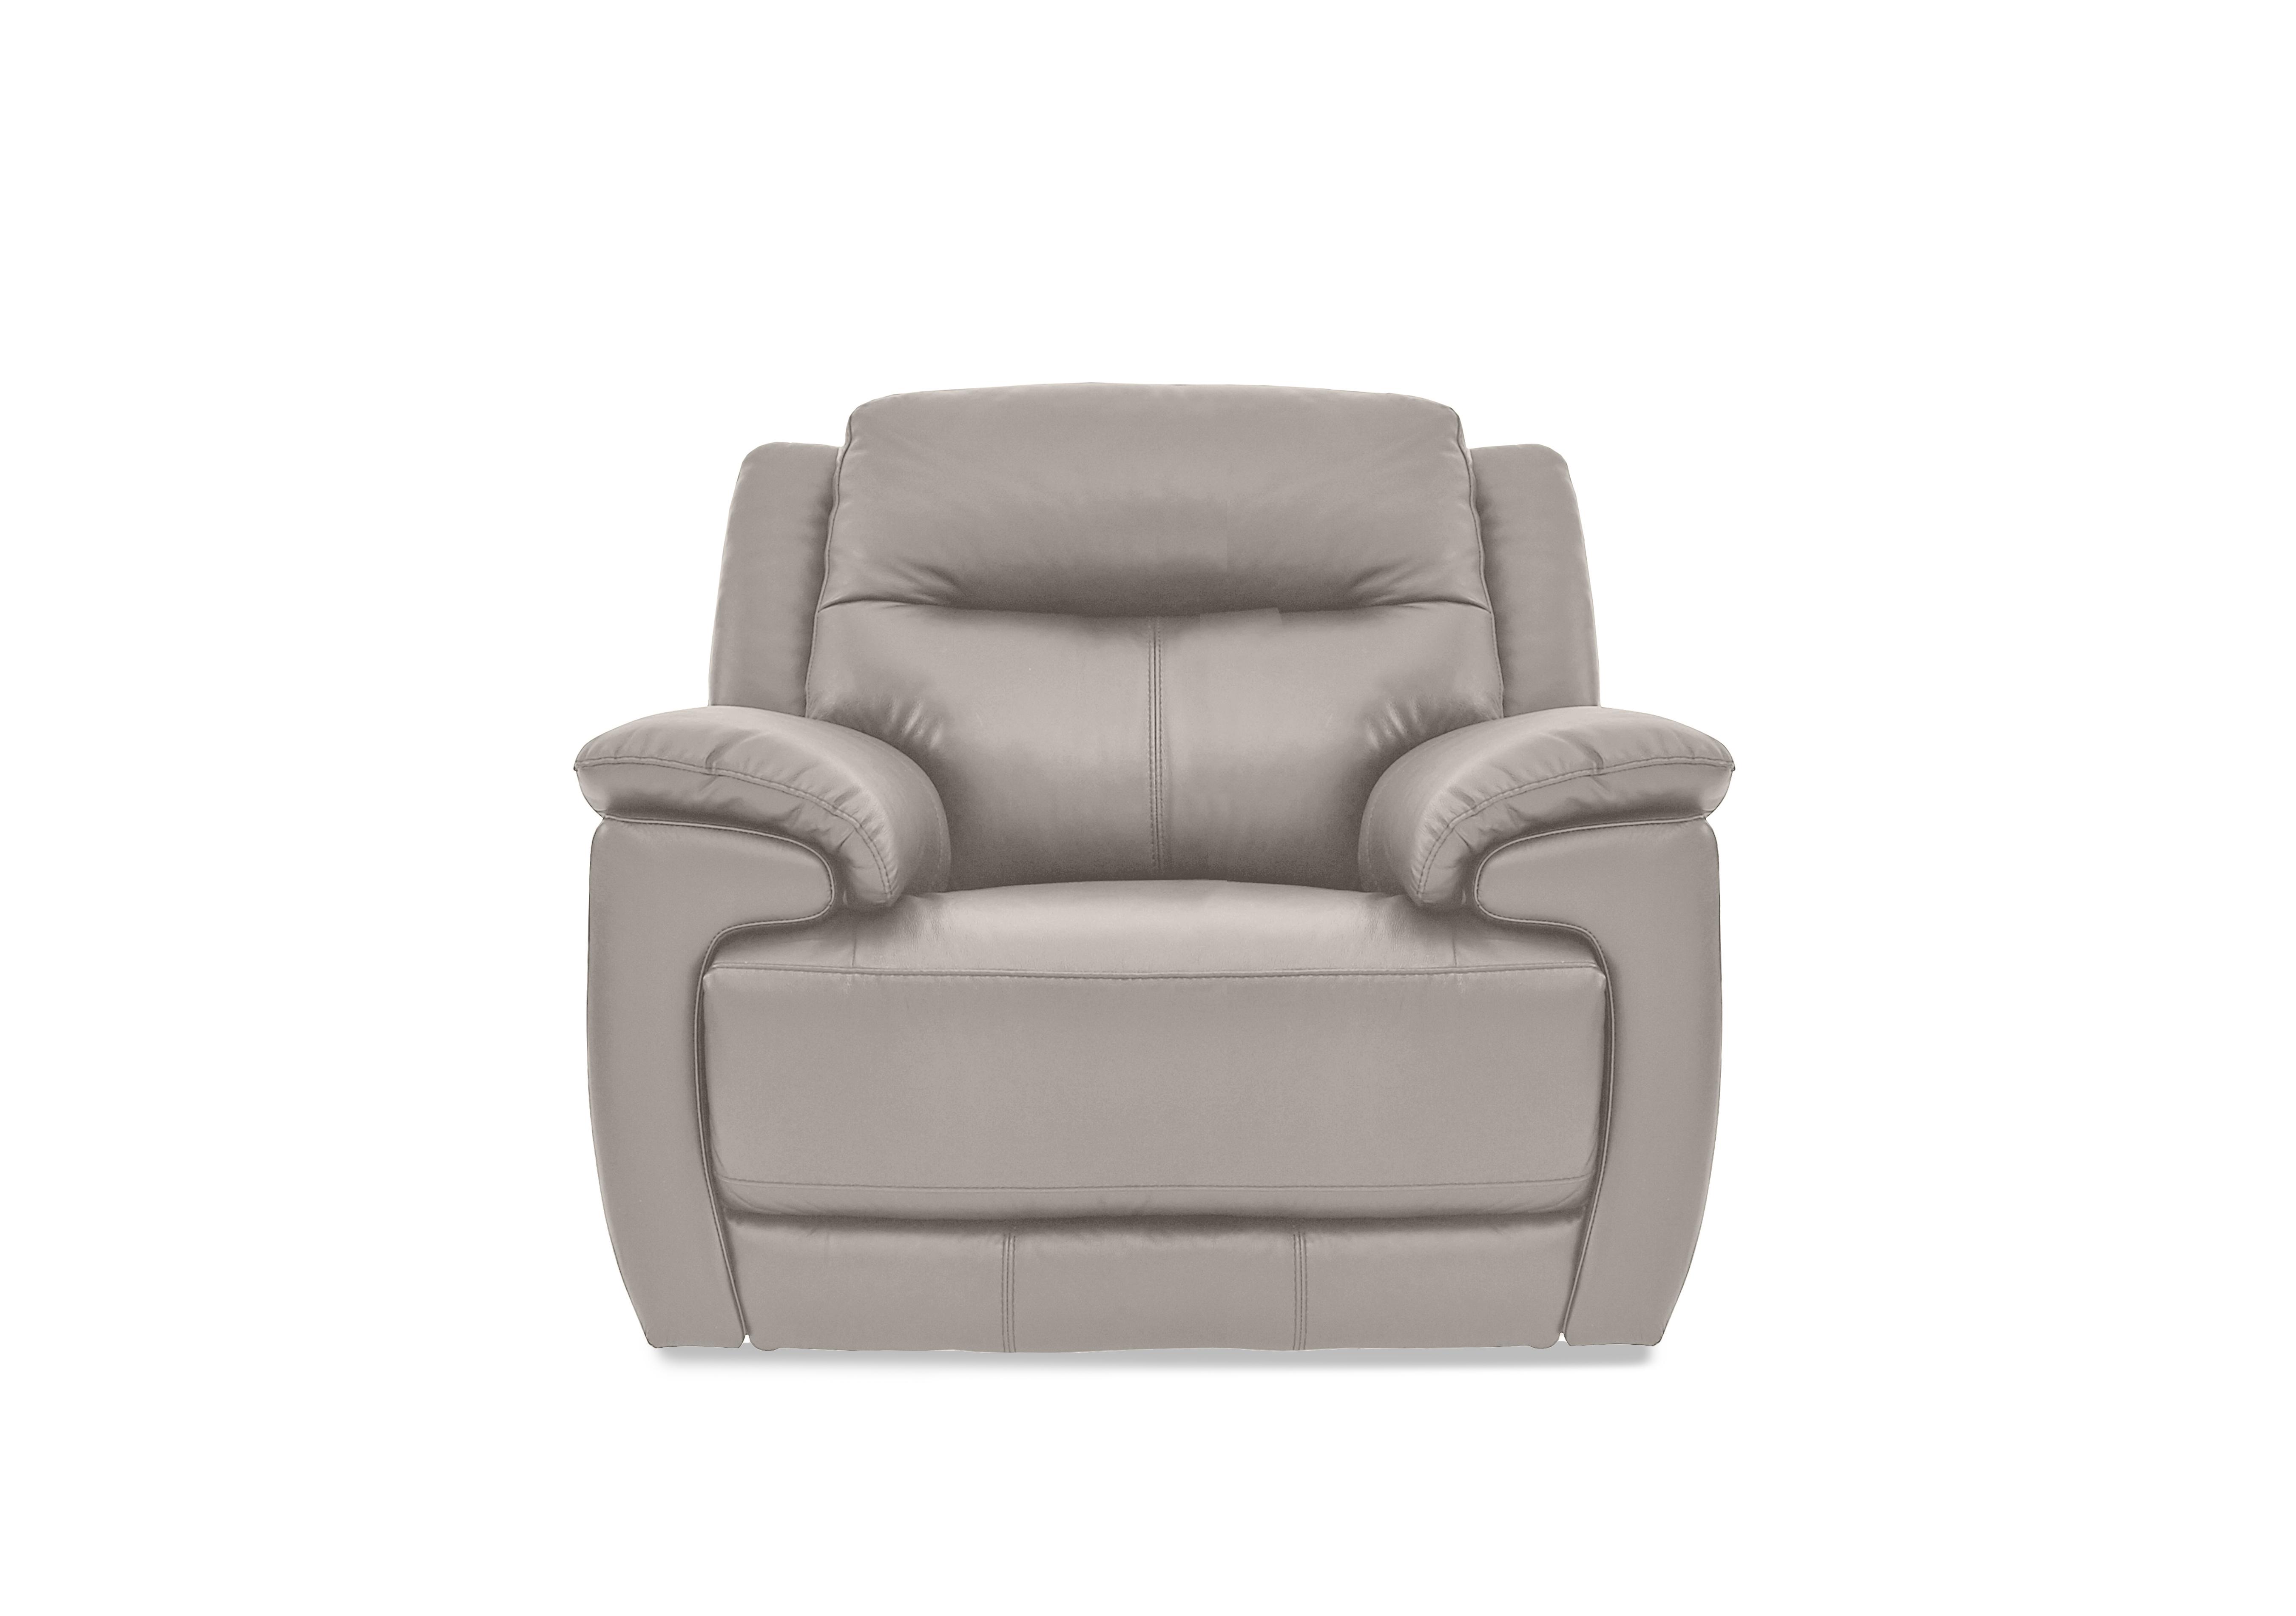 Touch Leather Armchair in Bv-946b Silver Grey on Furniture Village